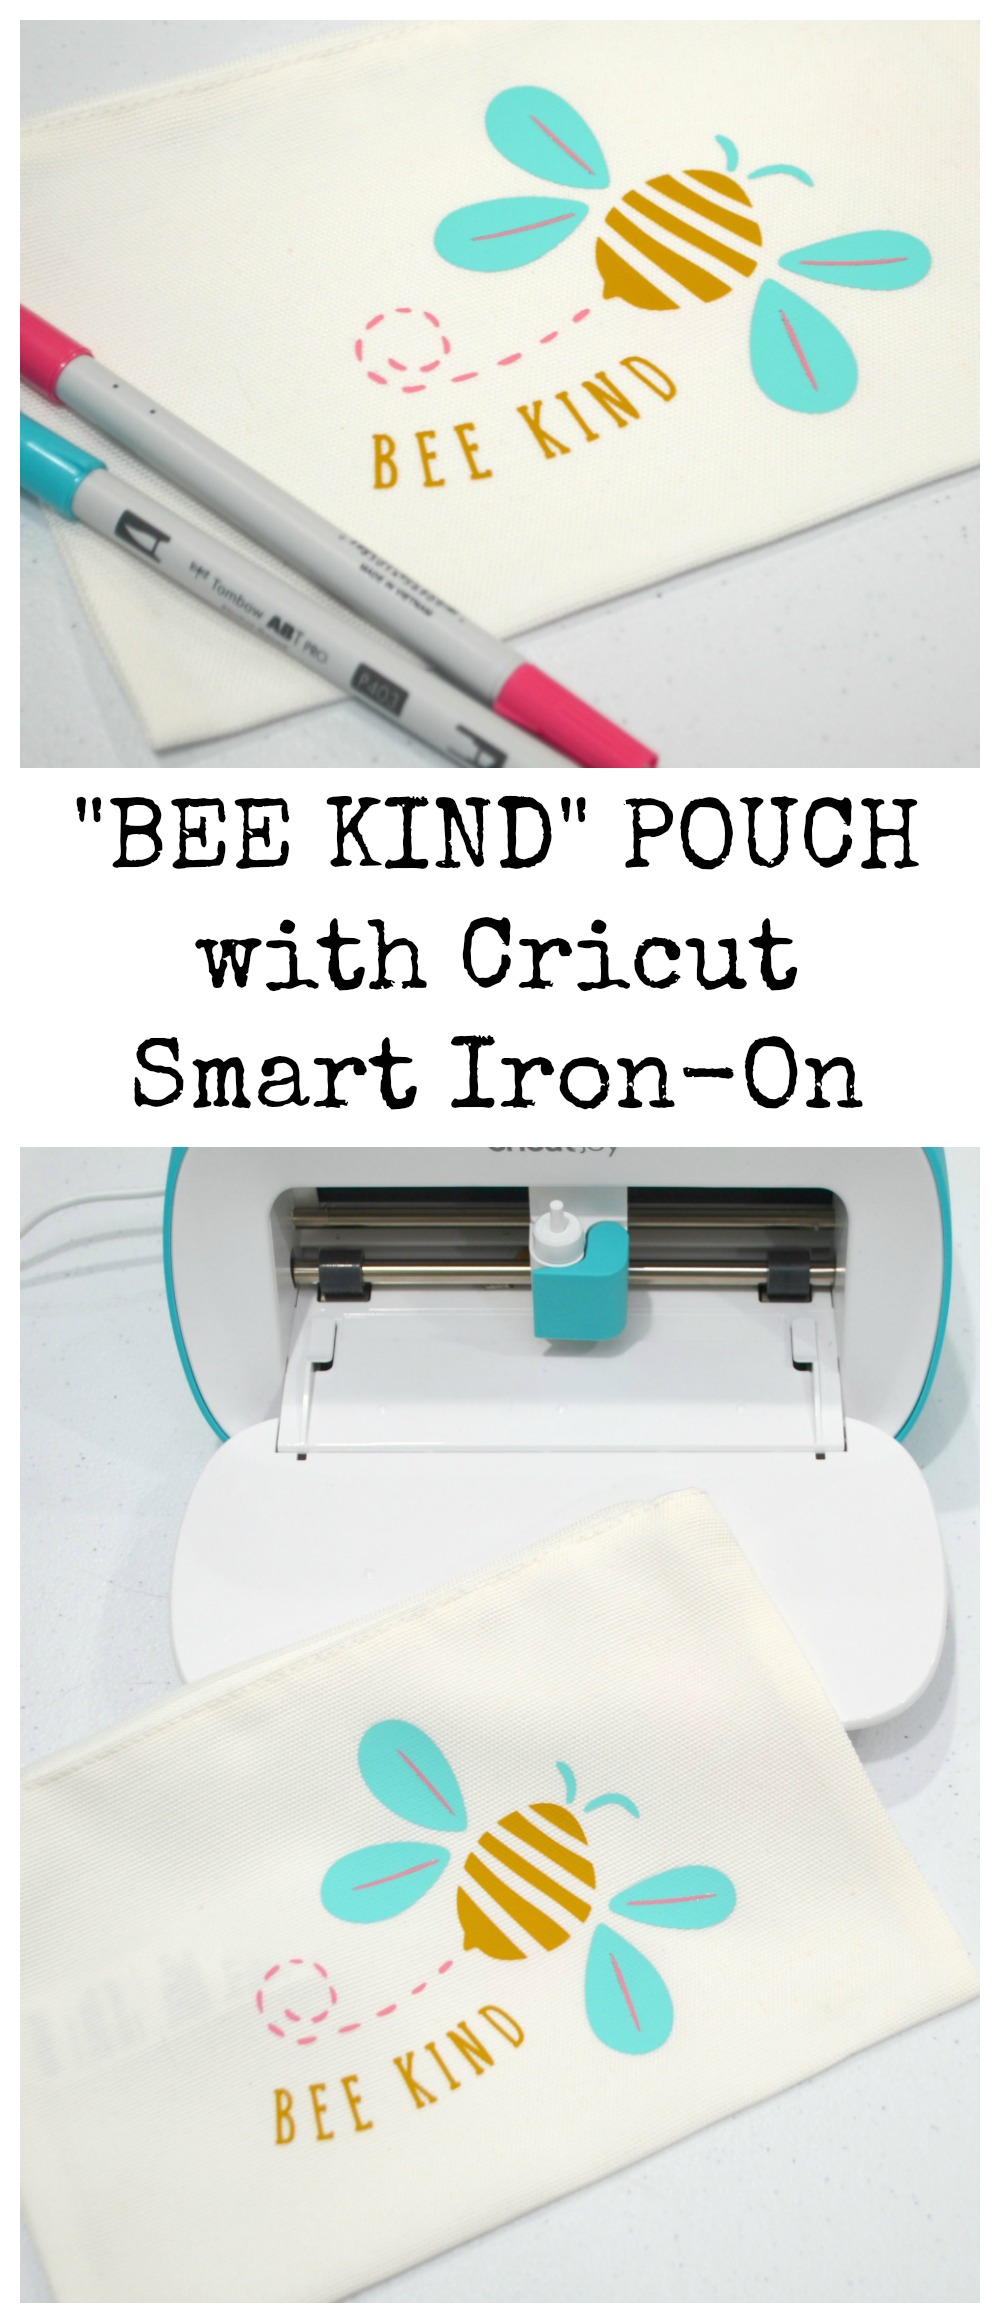 Bee Kind Pouch with Cricut Smart Iron-On